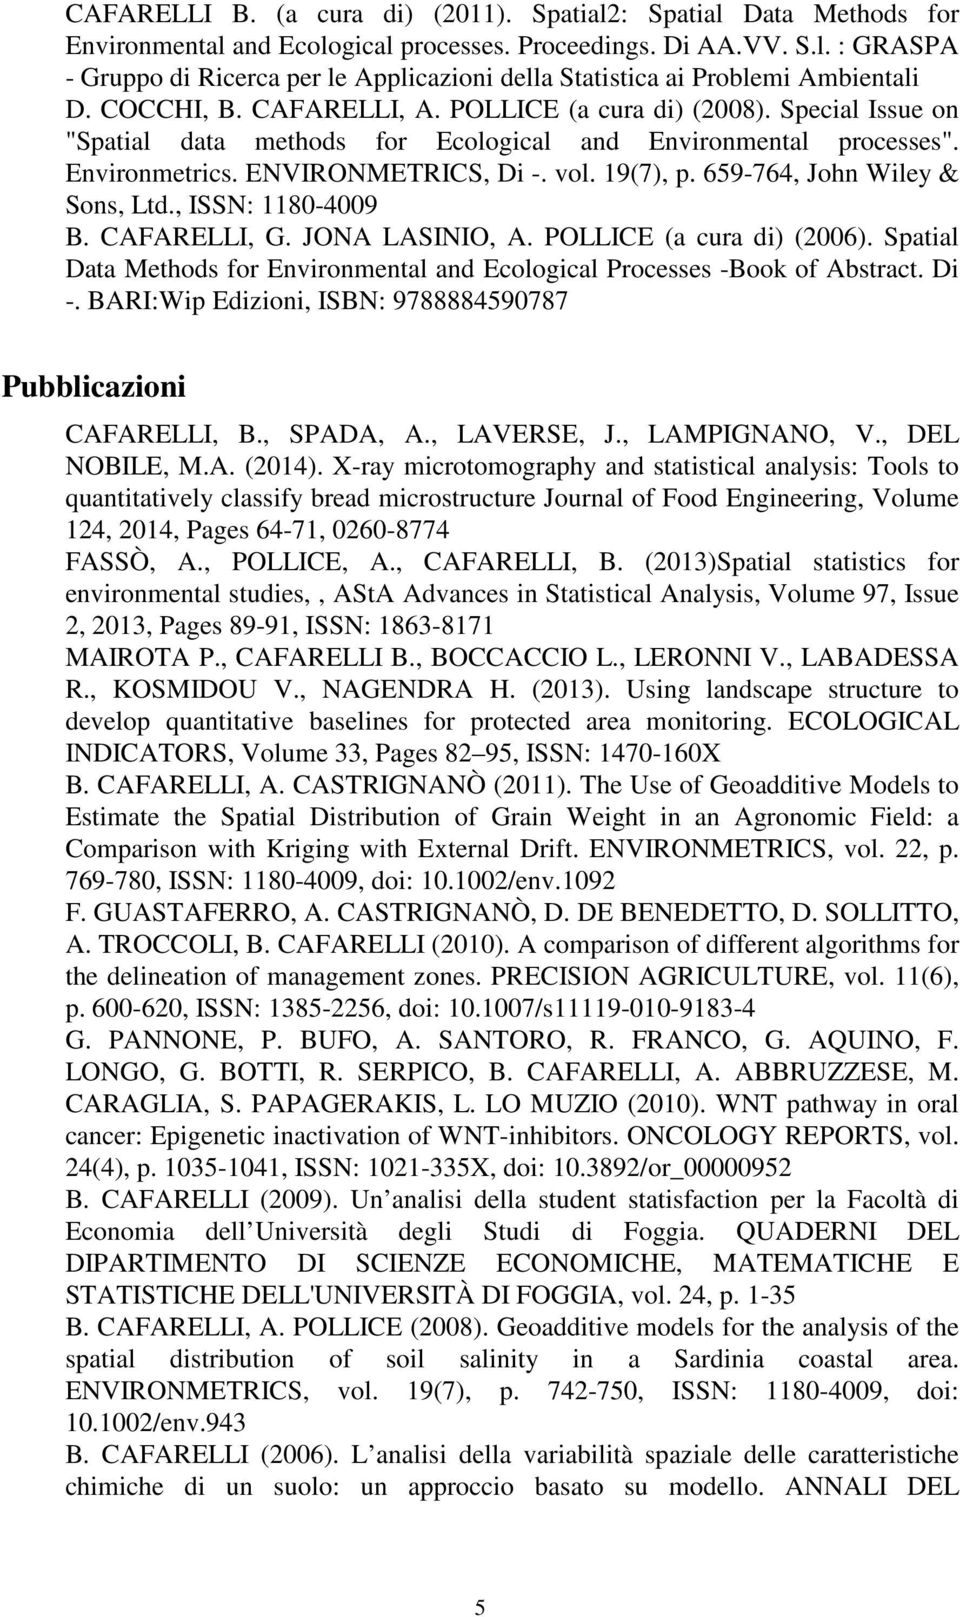 659-764, John Wiley & Sons, Ltd., ISSN: 1180-4009 B. CAFARELLI, G. JONA LASINIO, A. POLLICE (a cura di) (2006). Spatial Data Methods for Environmental and Ecological Processes -Book of Abstract. Di -.